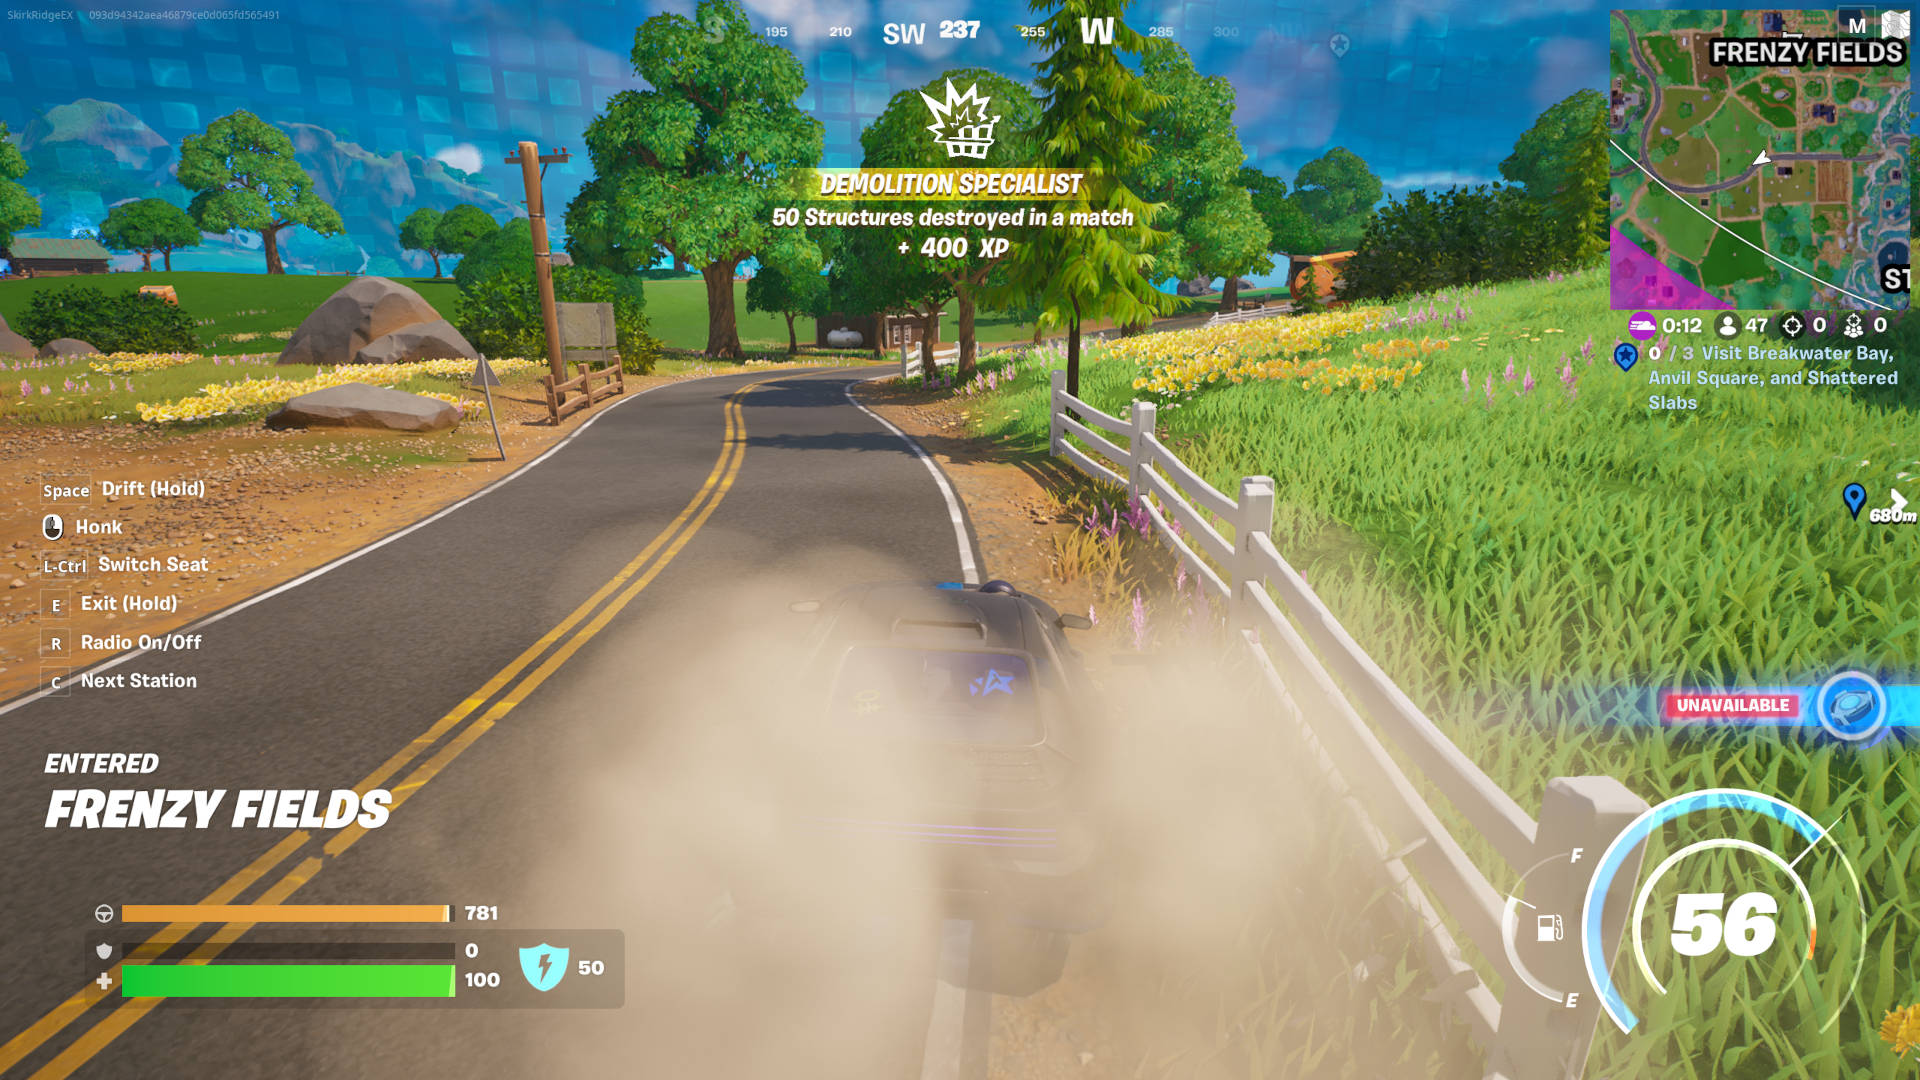 Fortnite Nitro Drifter: locations, how to boost, and how to drift